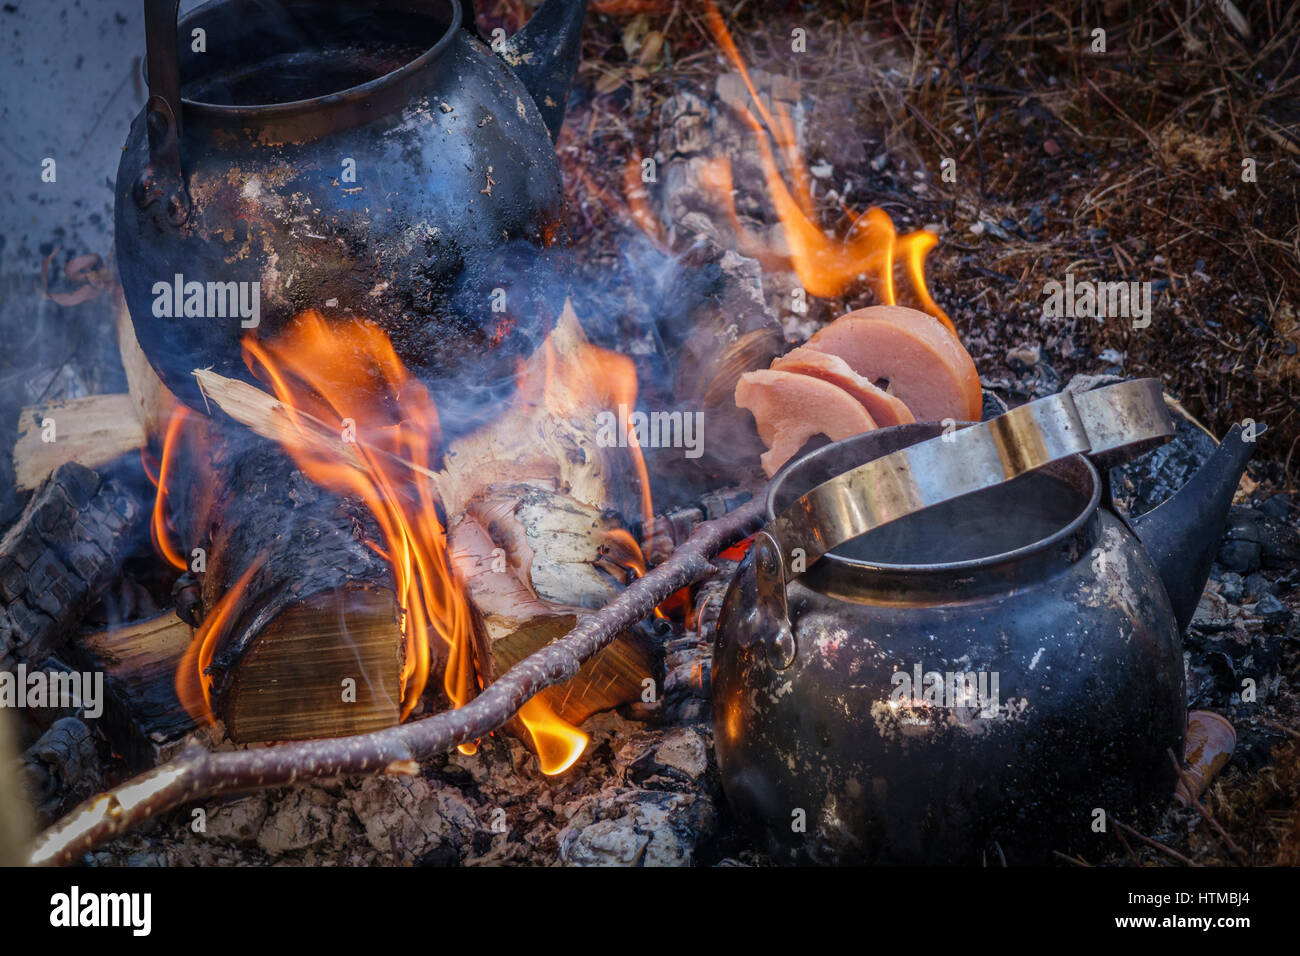 https://c8.alamy.com/comp/HTMBJ4/campfire-with-reindeer-sausage-lapland-guesthouse-in-kangos-lapland-HTMBJ4.jpg